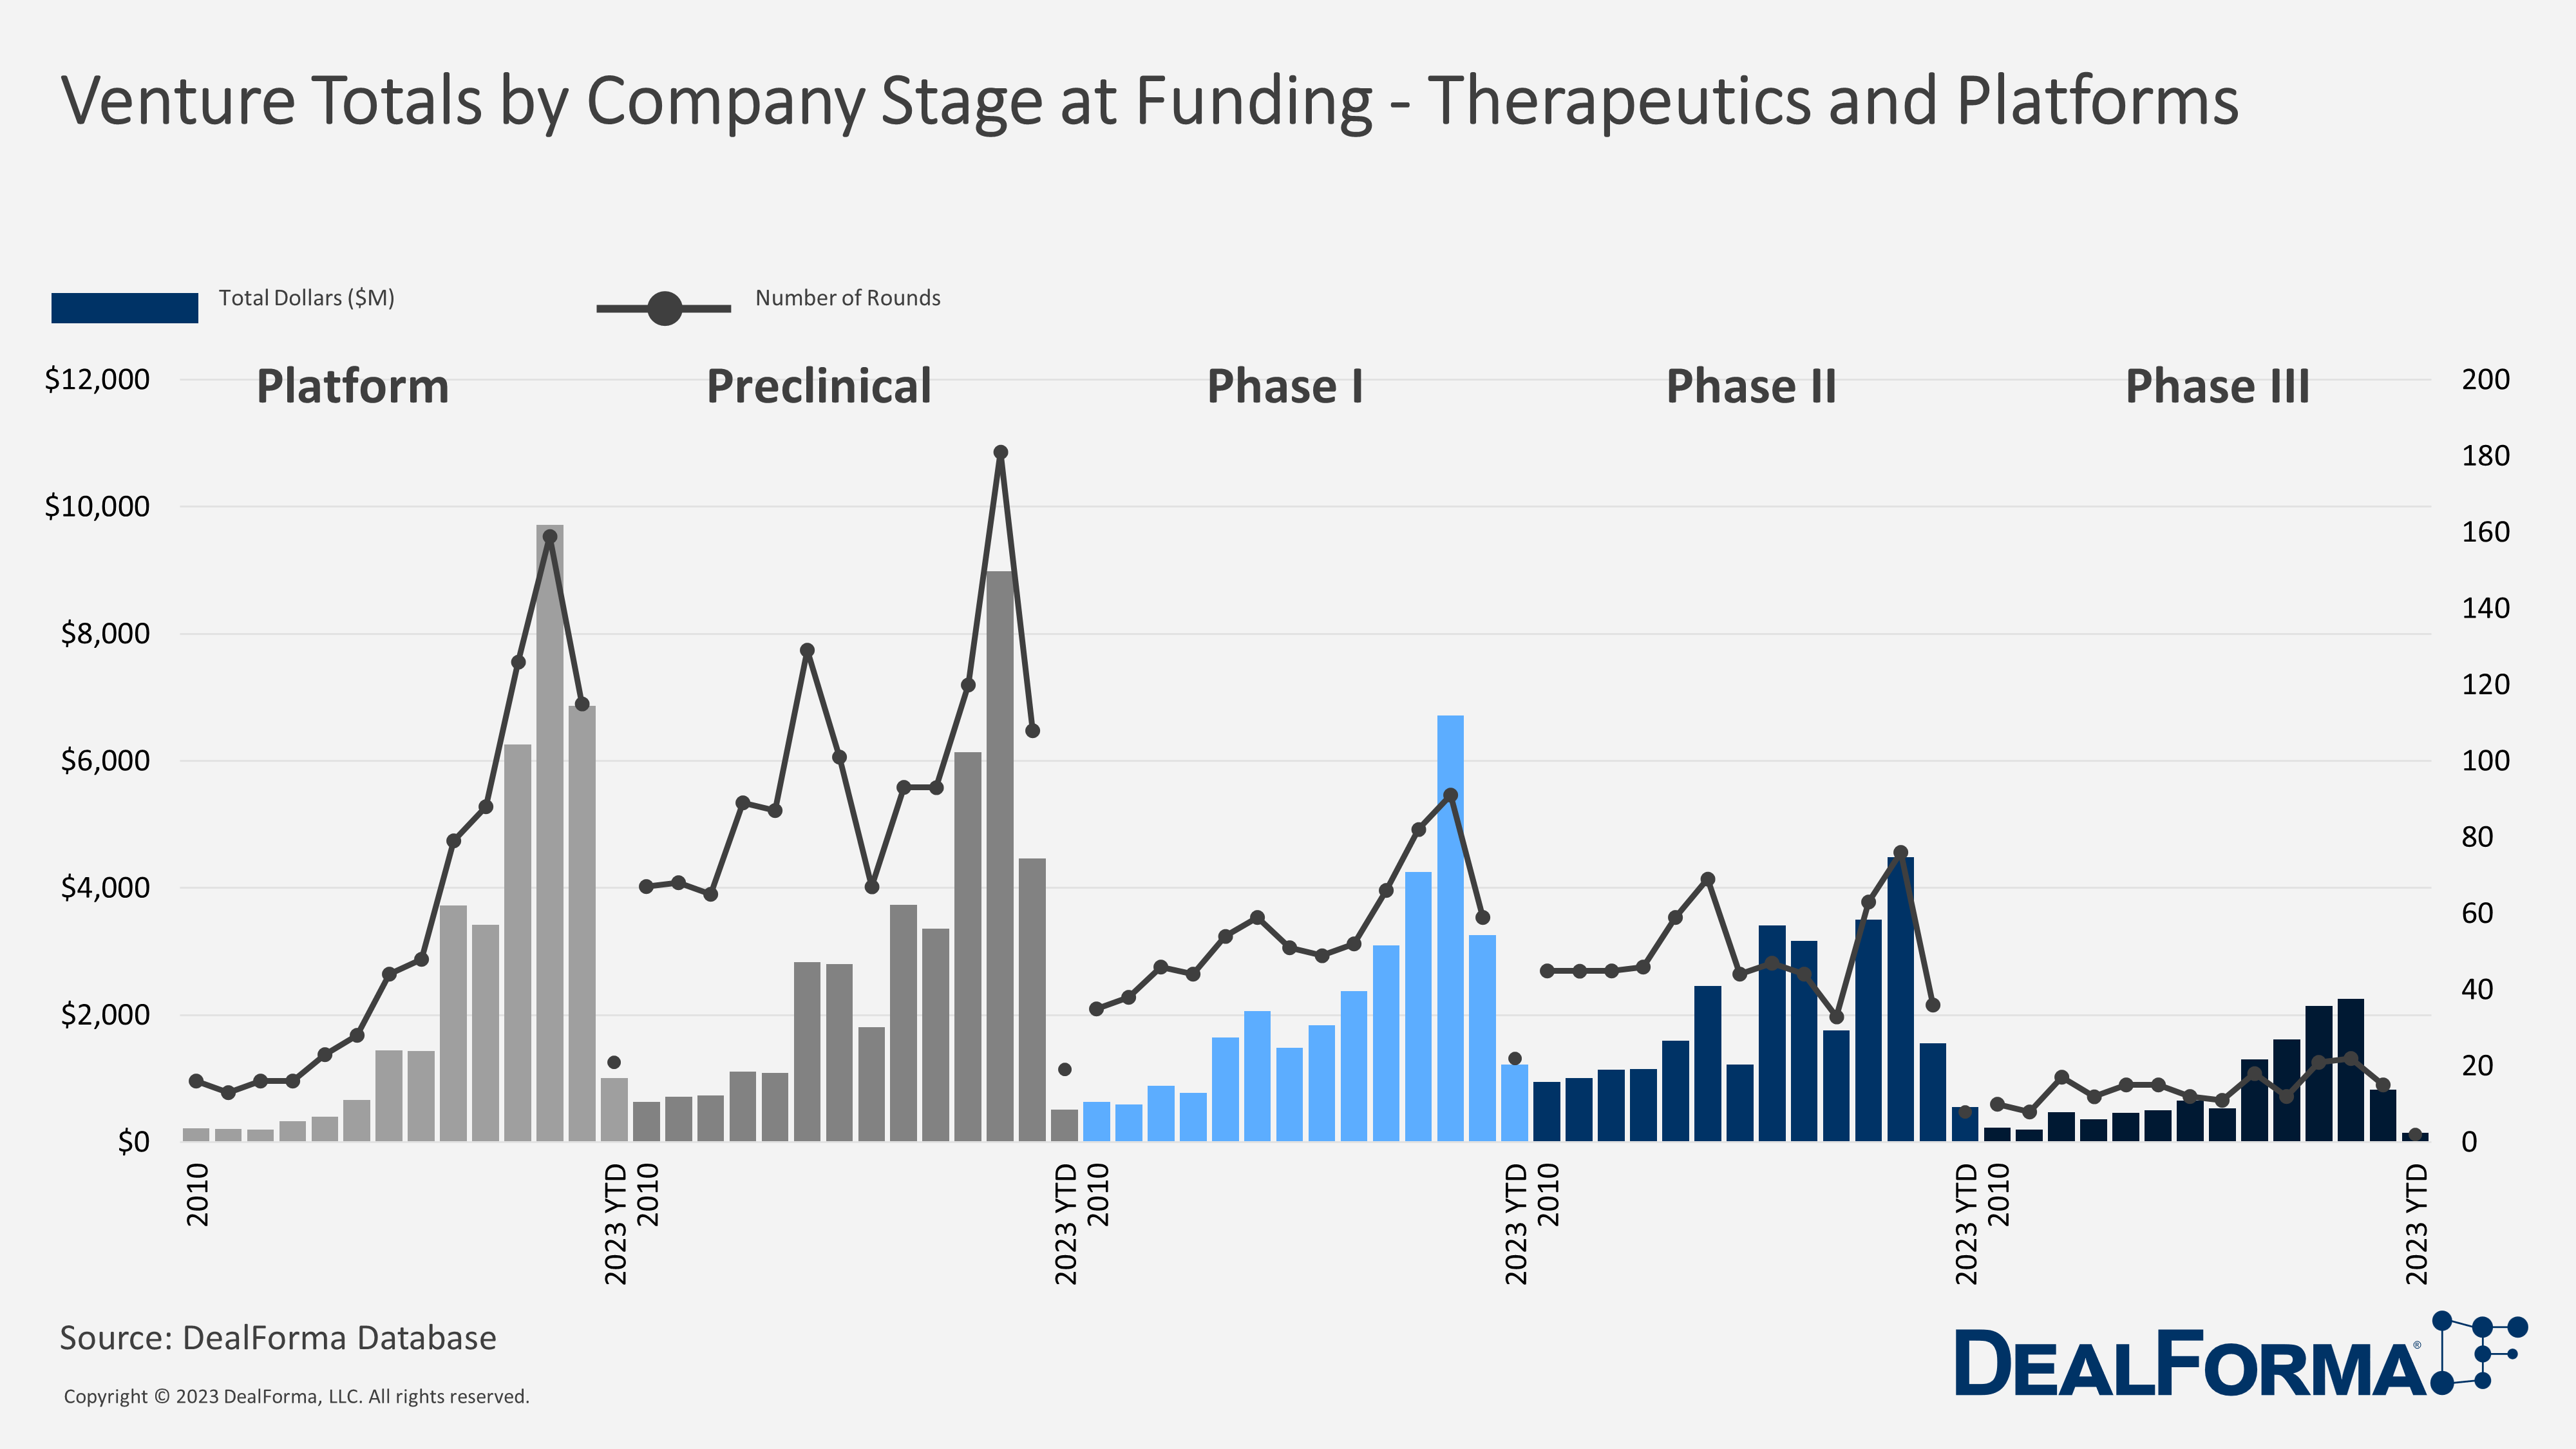 Venture Totals by Company Stage at Funding - Therapeutics and Platforms